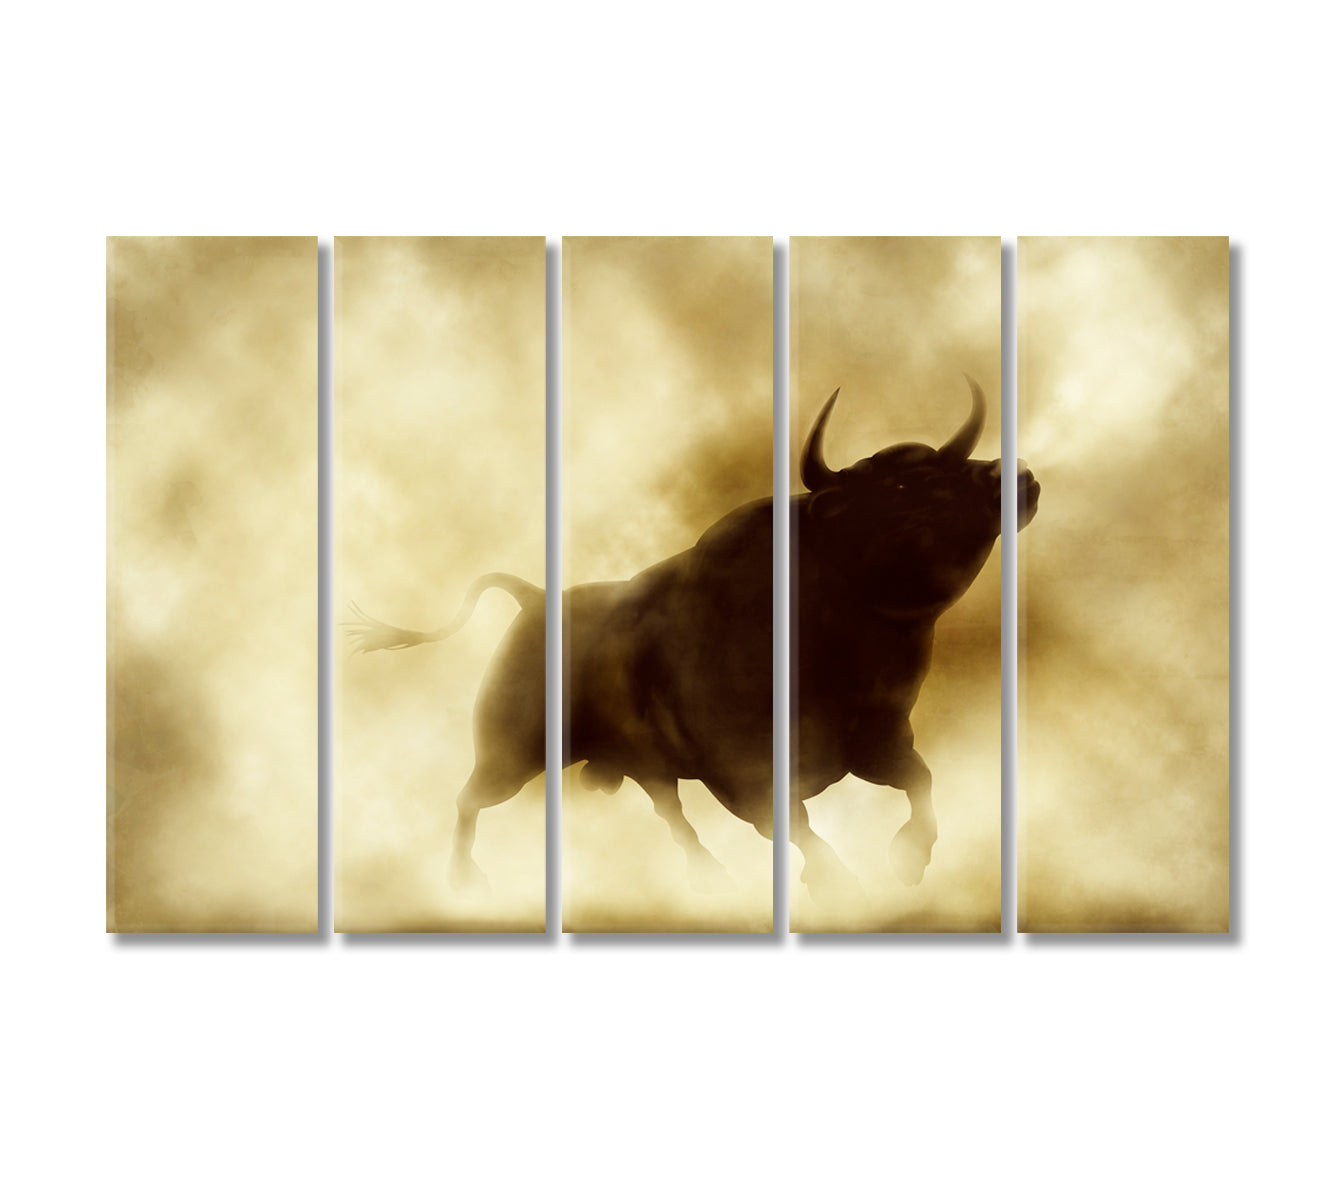 Angry Bull Silhouette in Smoke Canvas Print-Canvas Print-CetArt-5 Panels-36x24 inches-CetArt